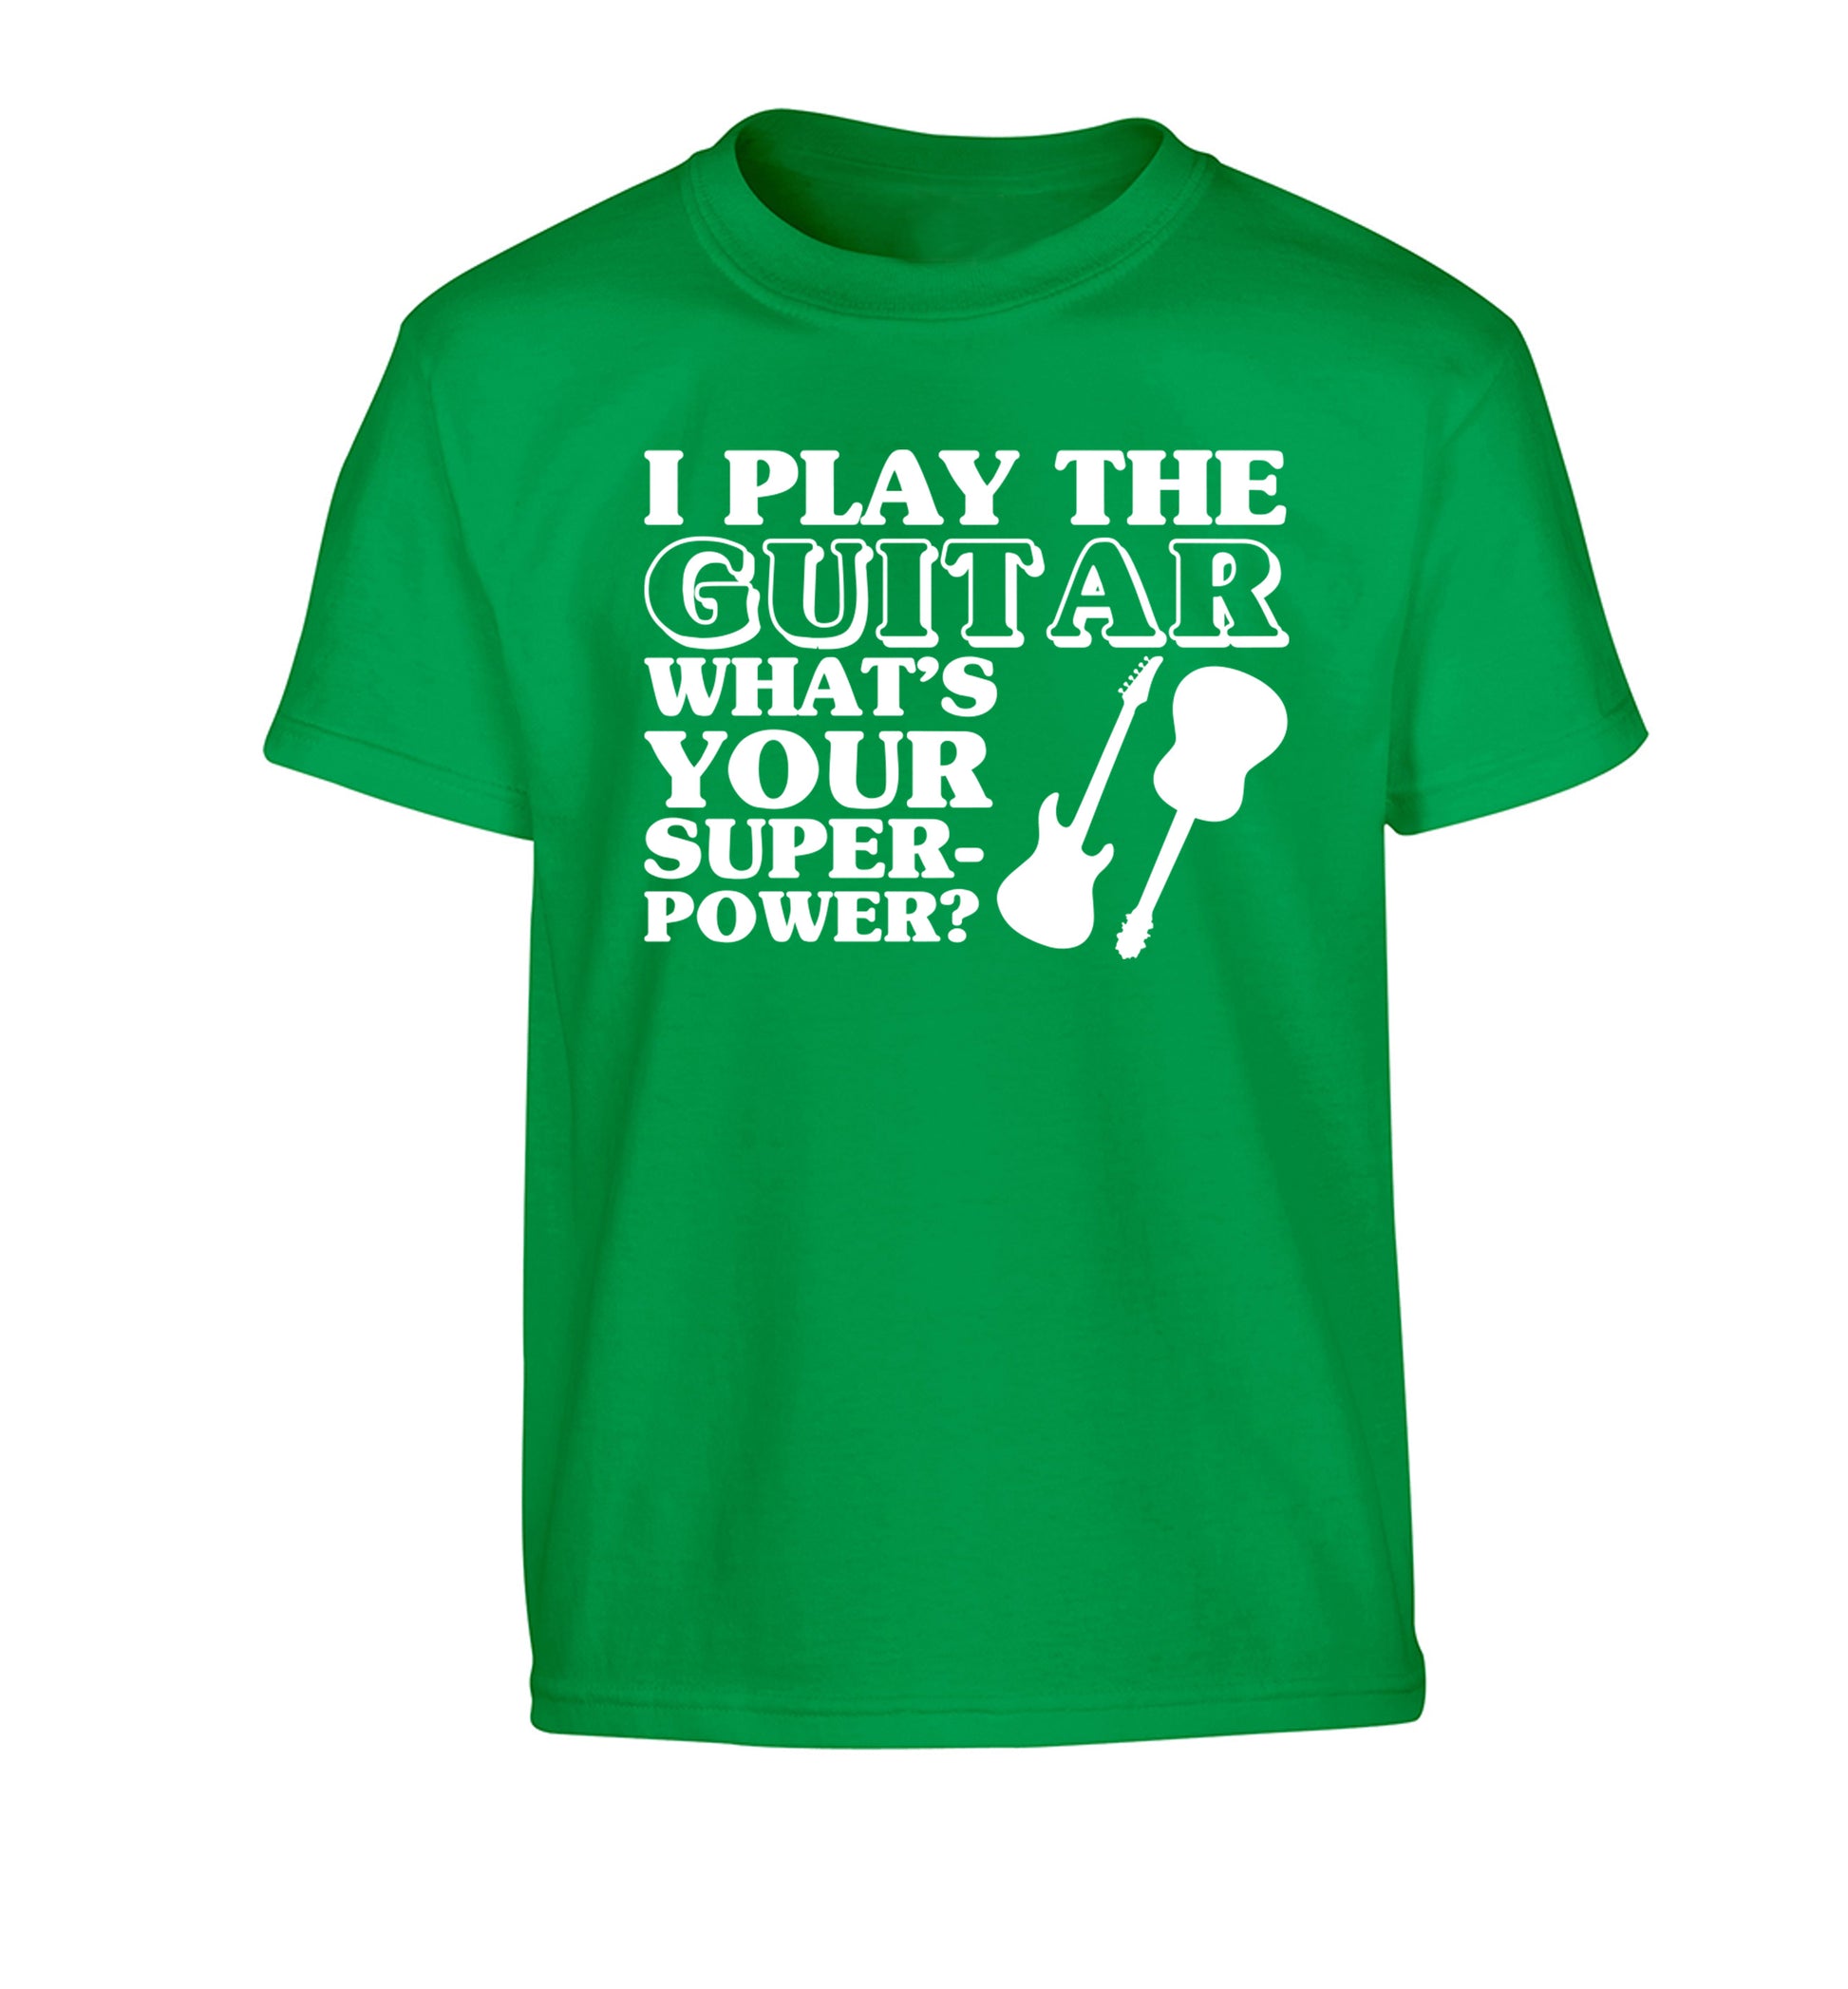 I play the guitar what's your superpower? Children's green Tshirt 3-4 Years